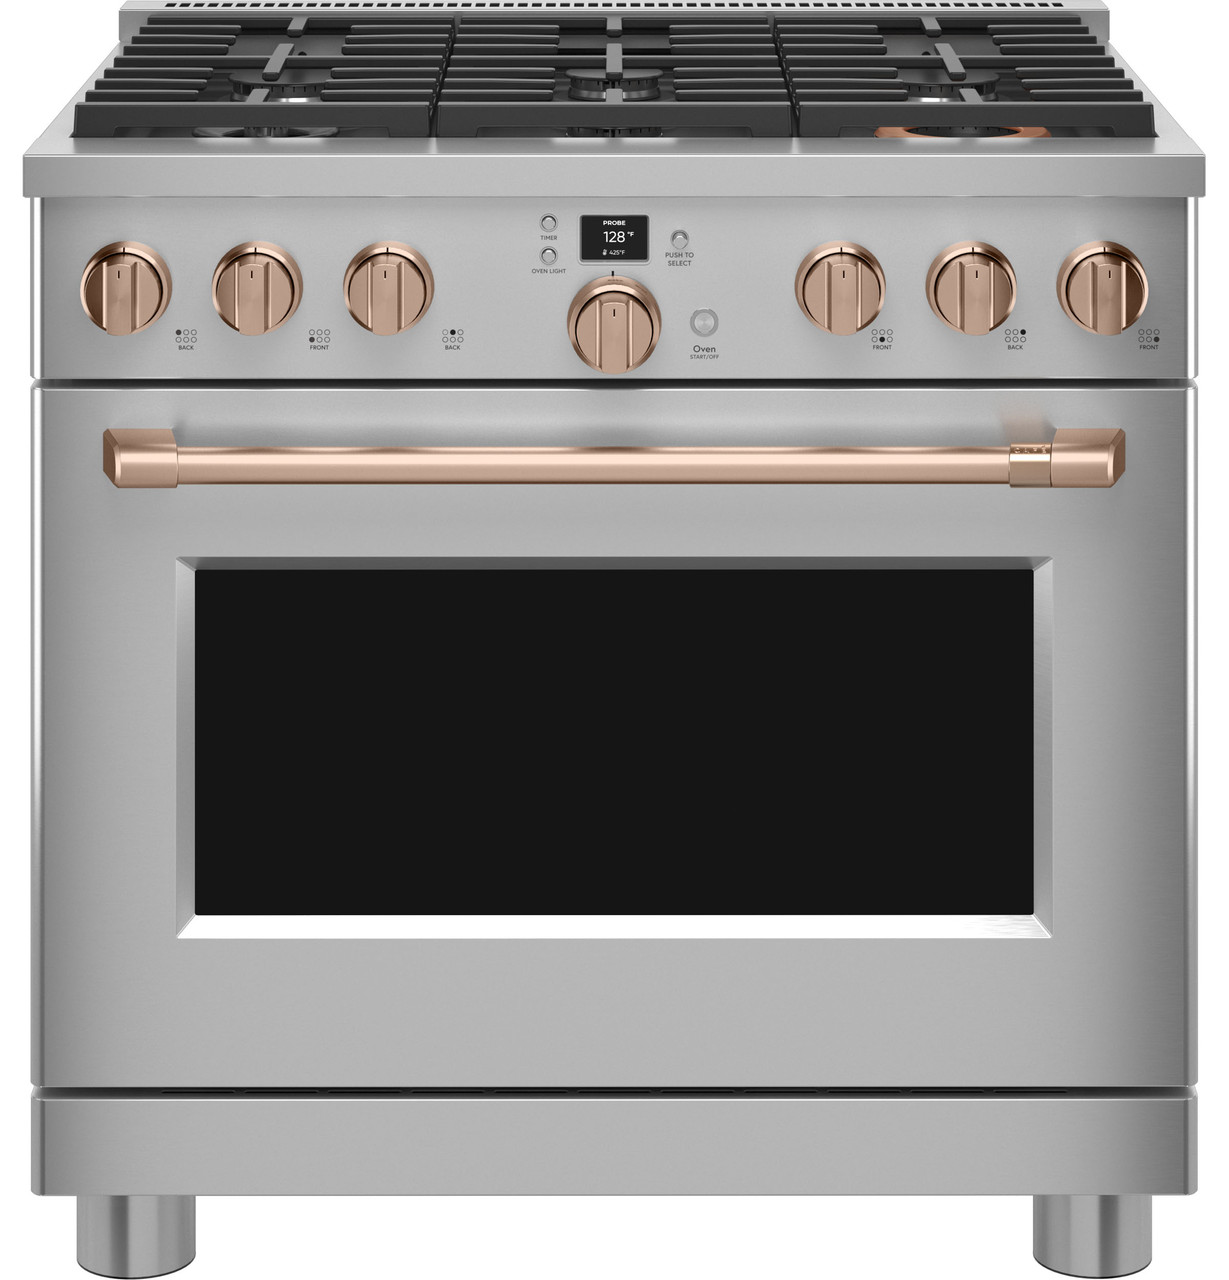 GE Cafe Appliances: Are They Worth It?